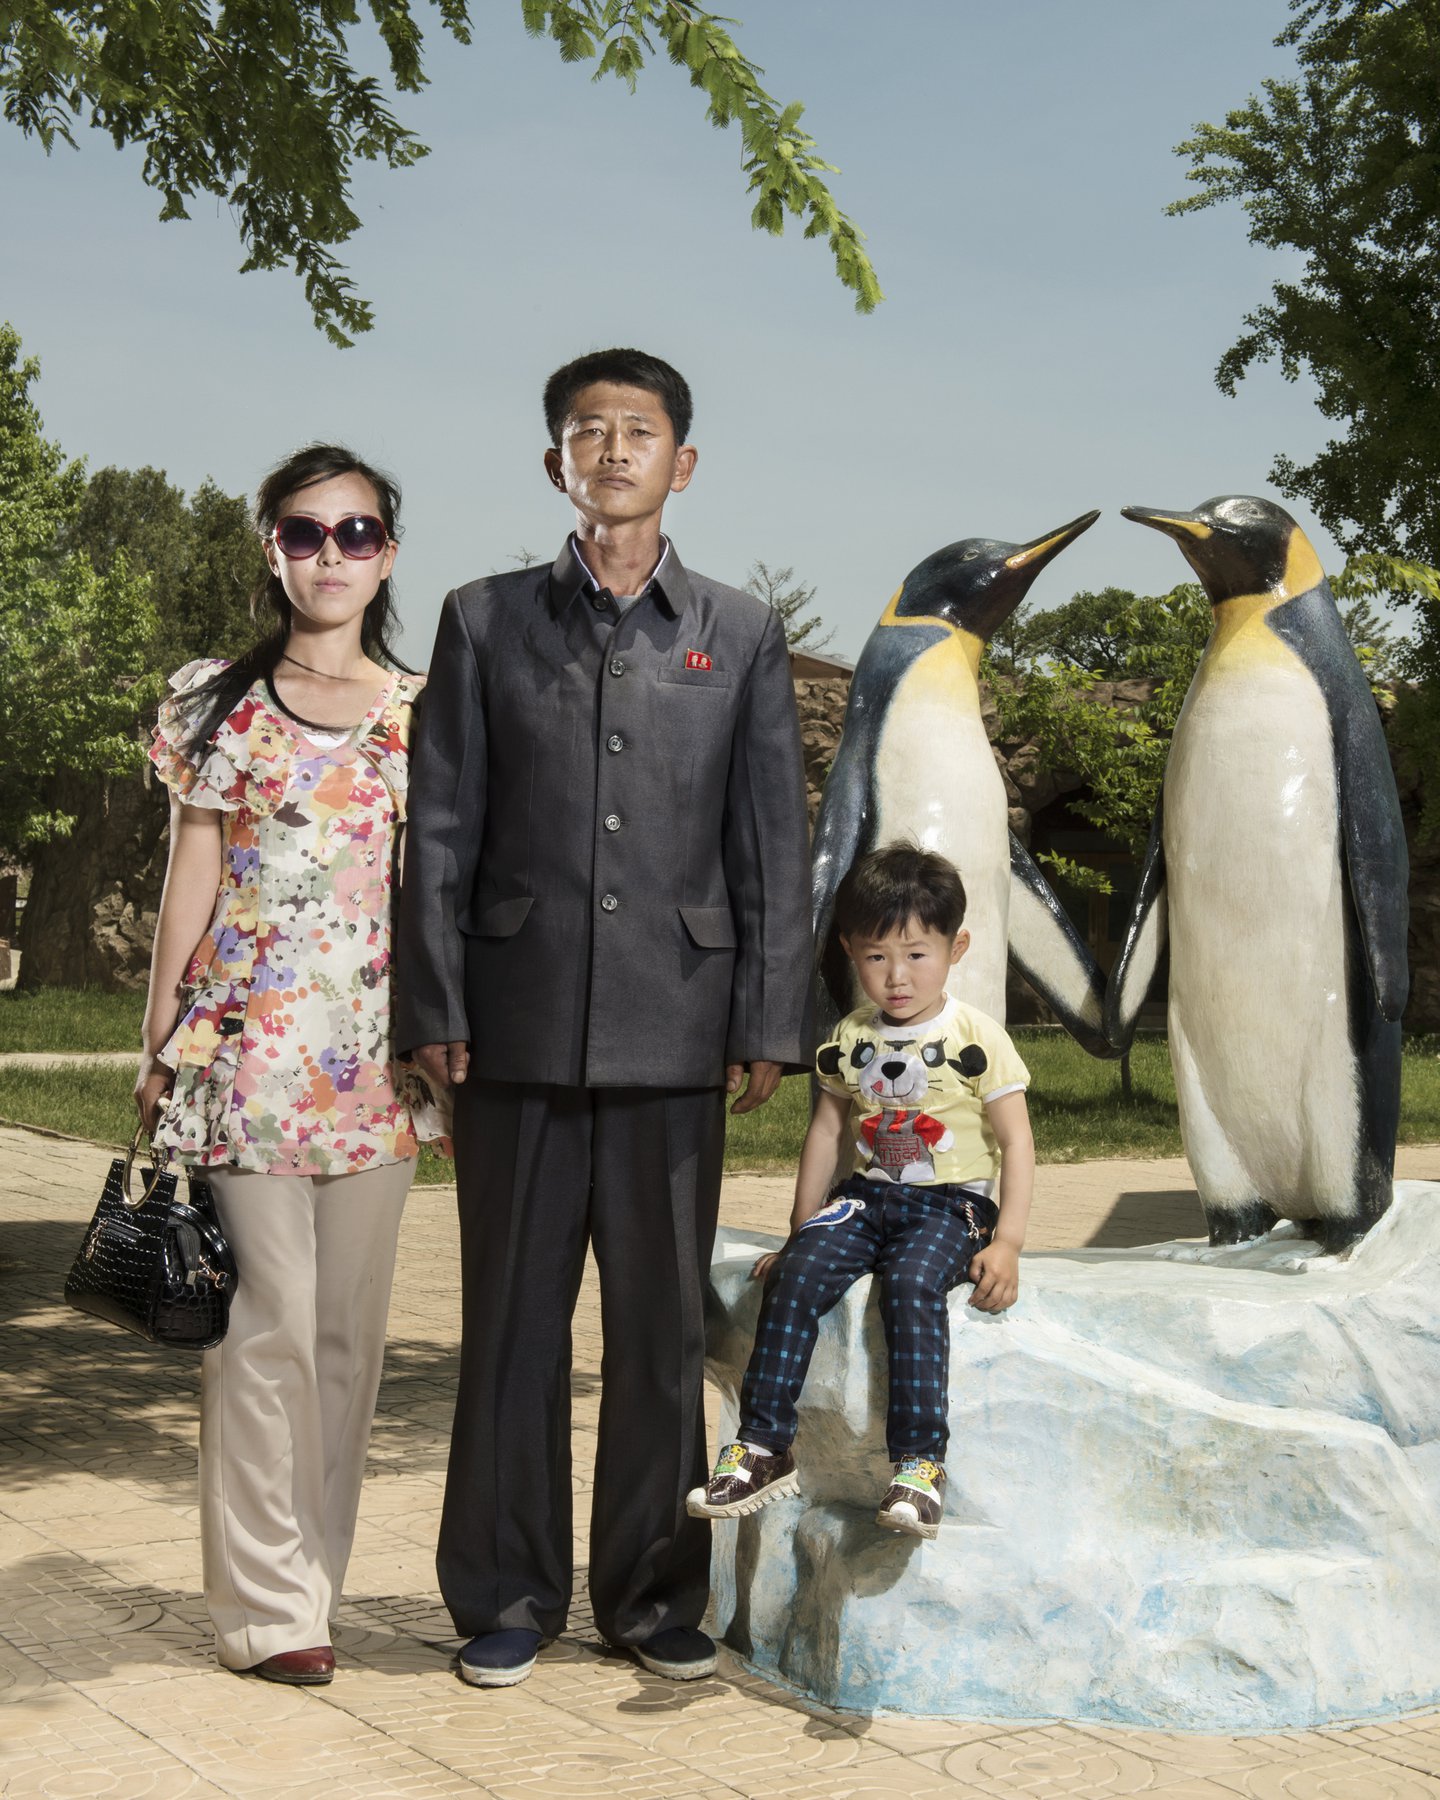 “I had the chance to open the doors a little”: Stephan Gladieu photographs the people of North Korea